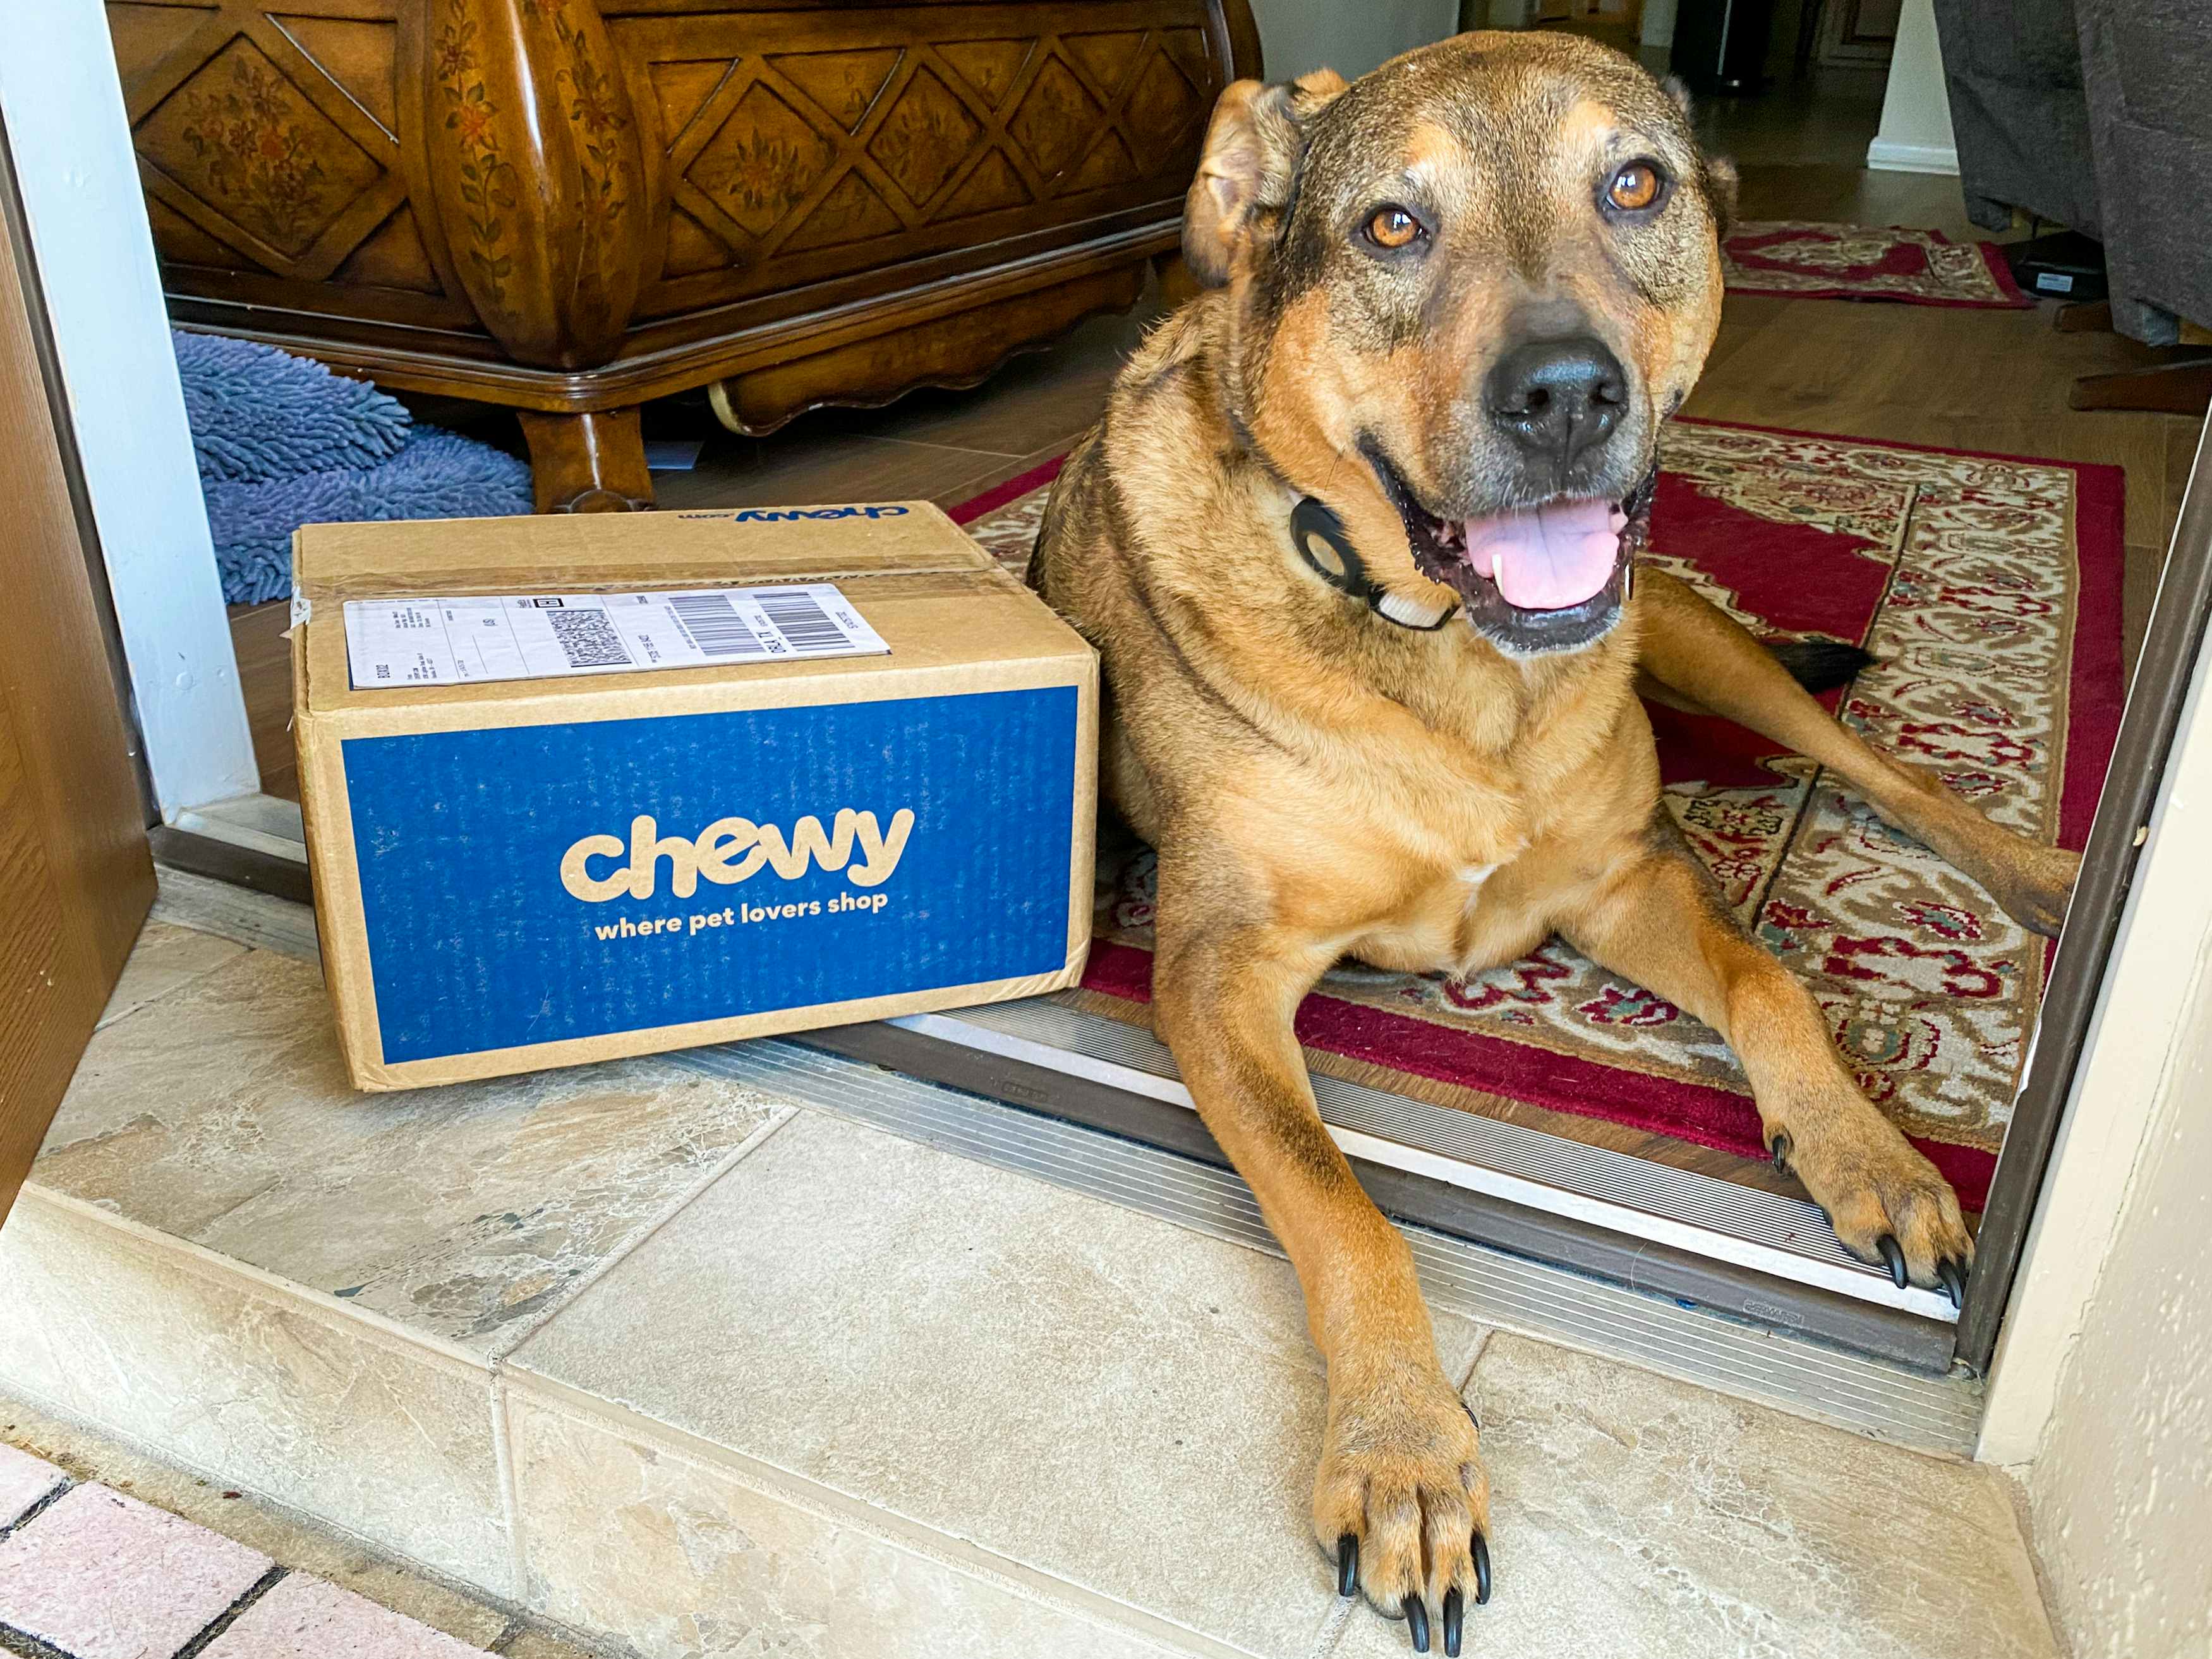 A dog laying in a front doorway with a Chewy box next to it.